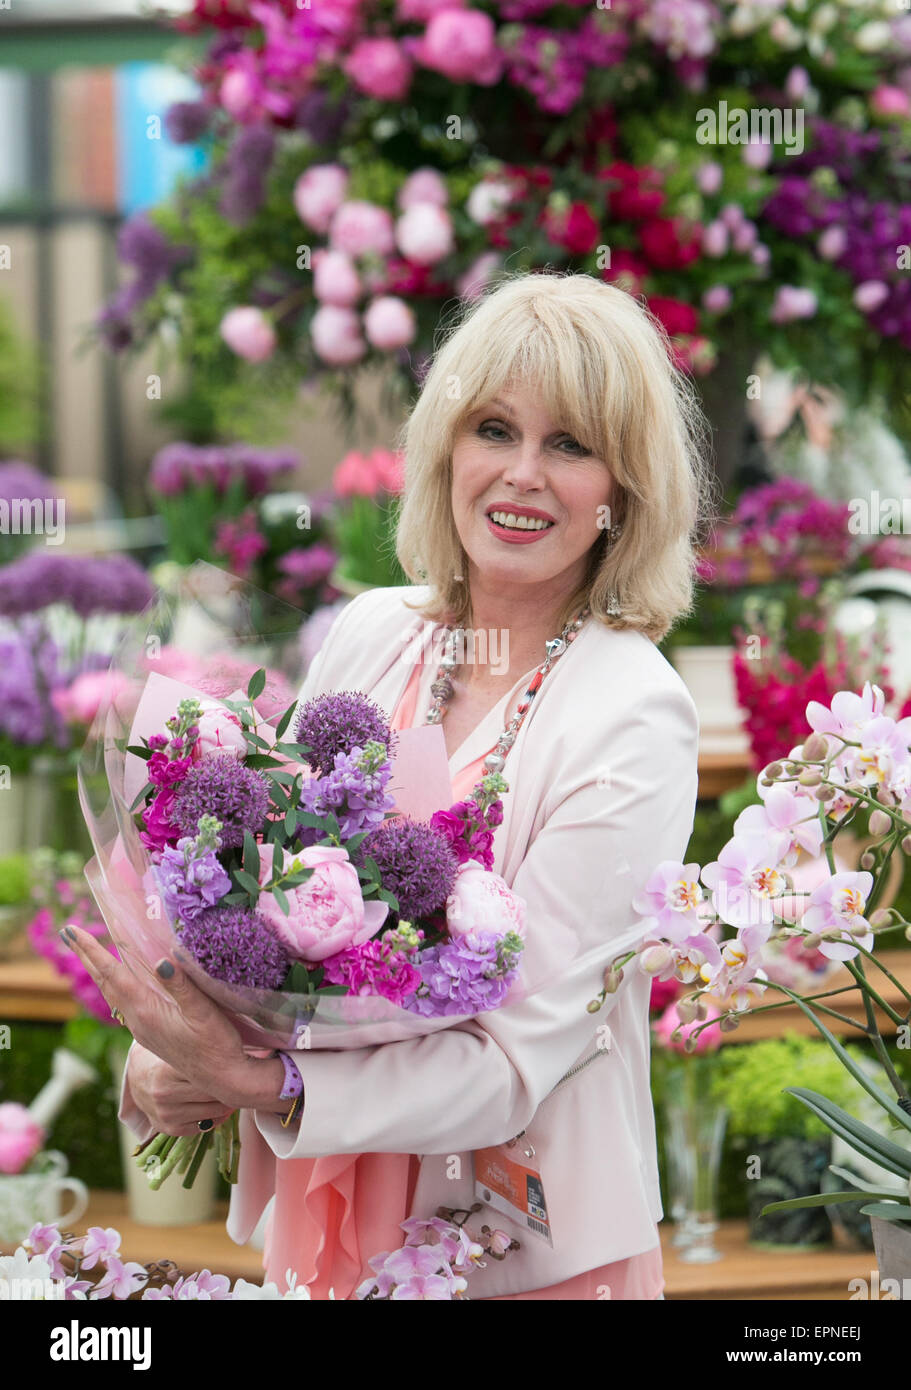 Actress,activist,campaigner and writer,Joanna Lumley at the RHS Chelsea Flower show 2015 Stock Photo